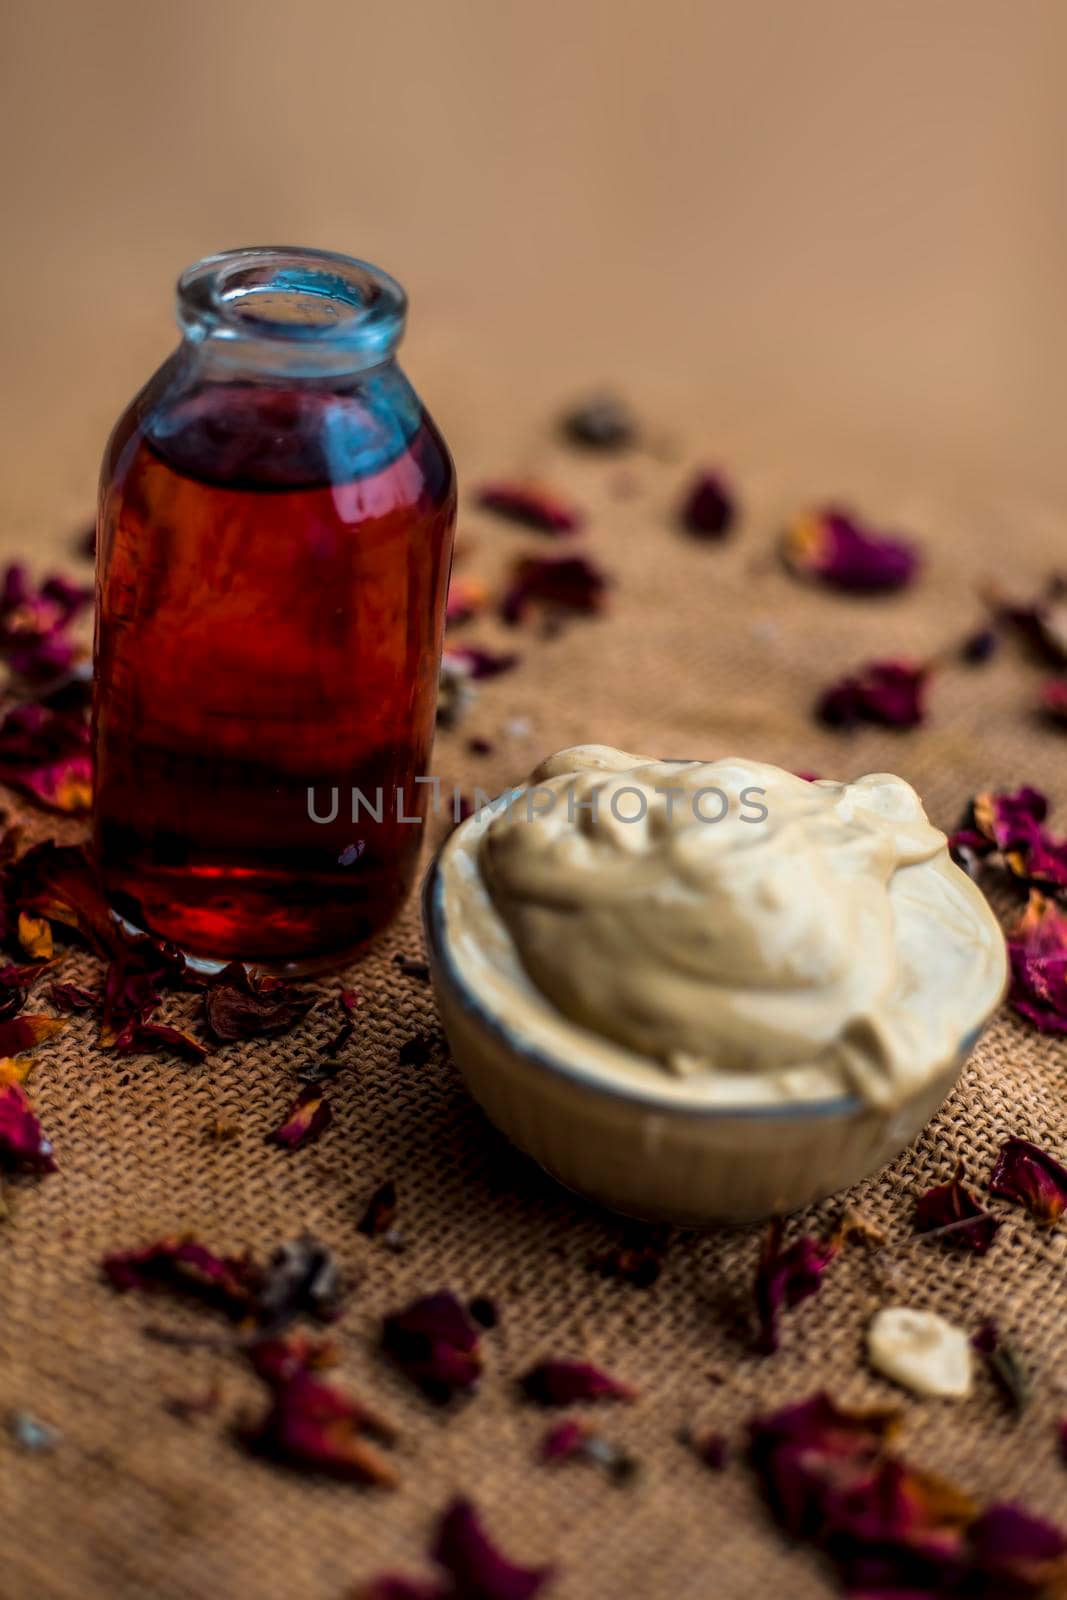 Ubtan/face mask/face pack of Multani mitti or fuller's earth on Gunny Bag surface in a glass bowl consisting of Multani mitti and rose water for the remedy or treatment of oily skin. by mirzamlk